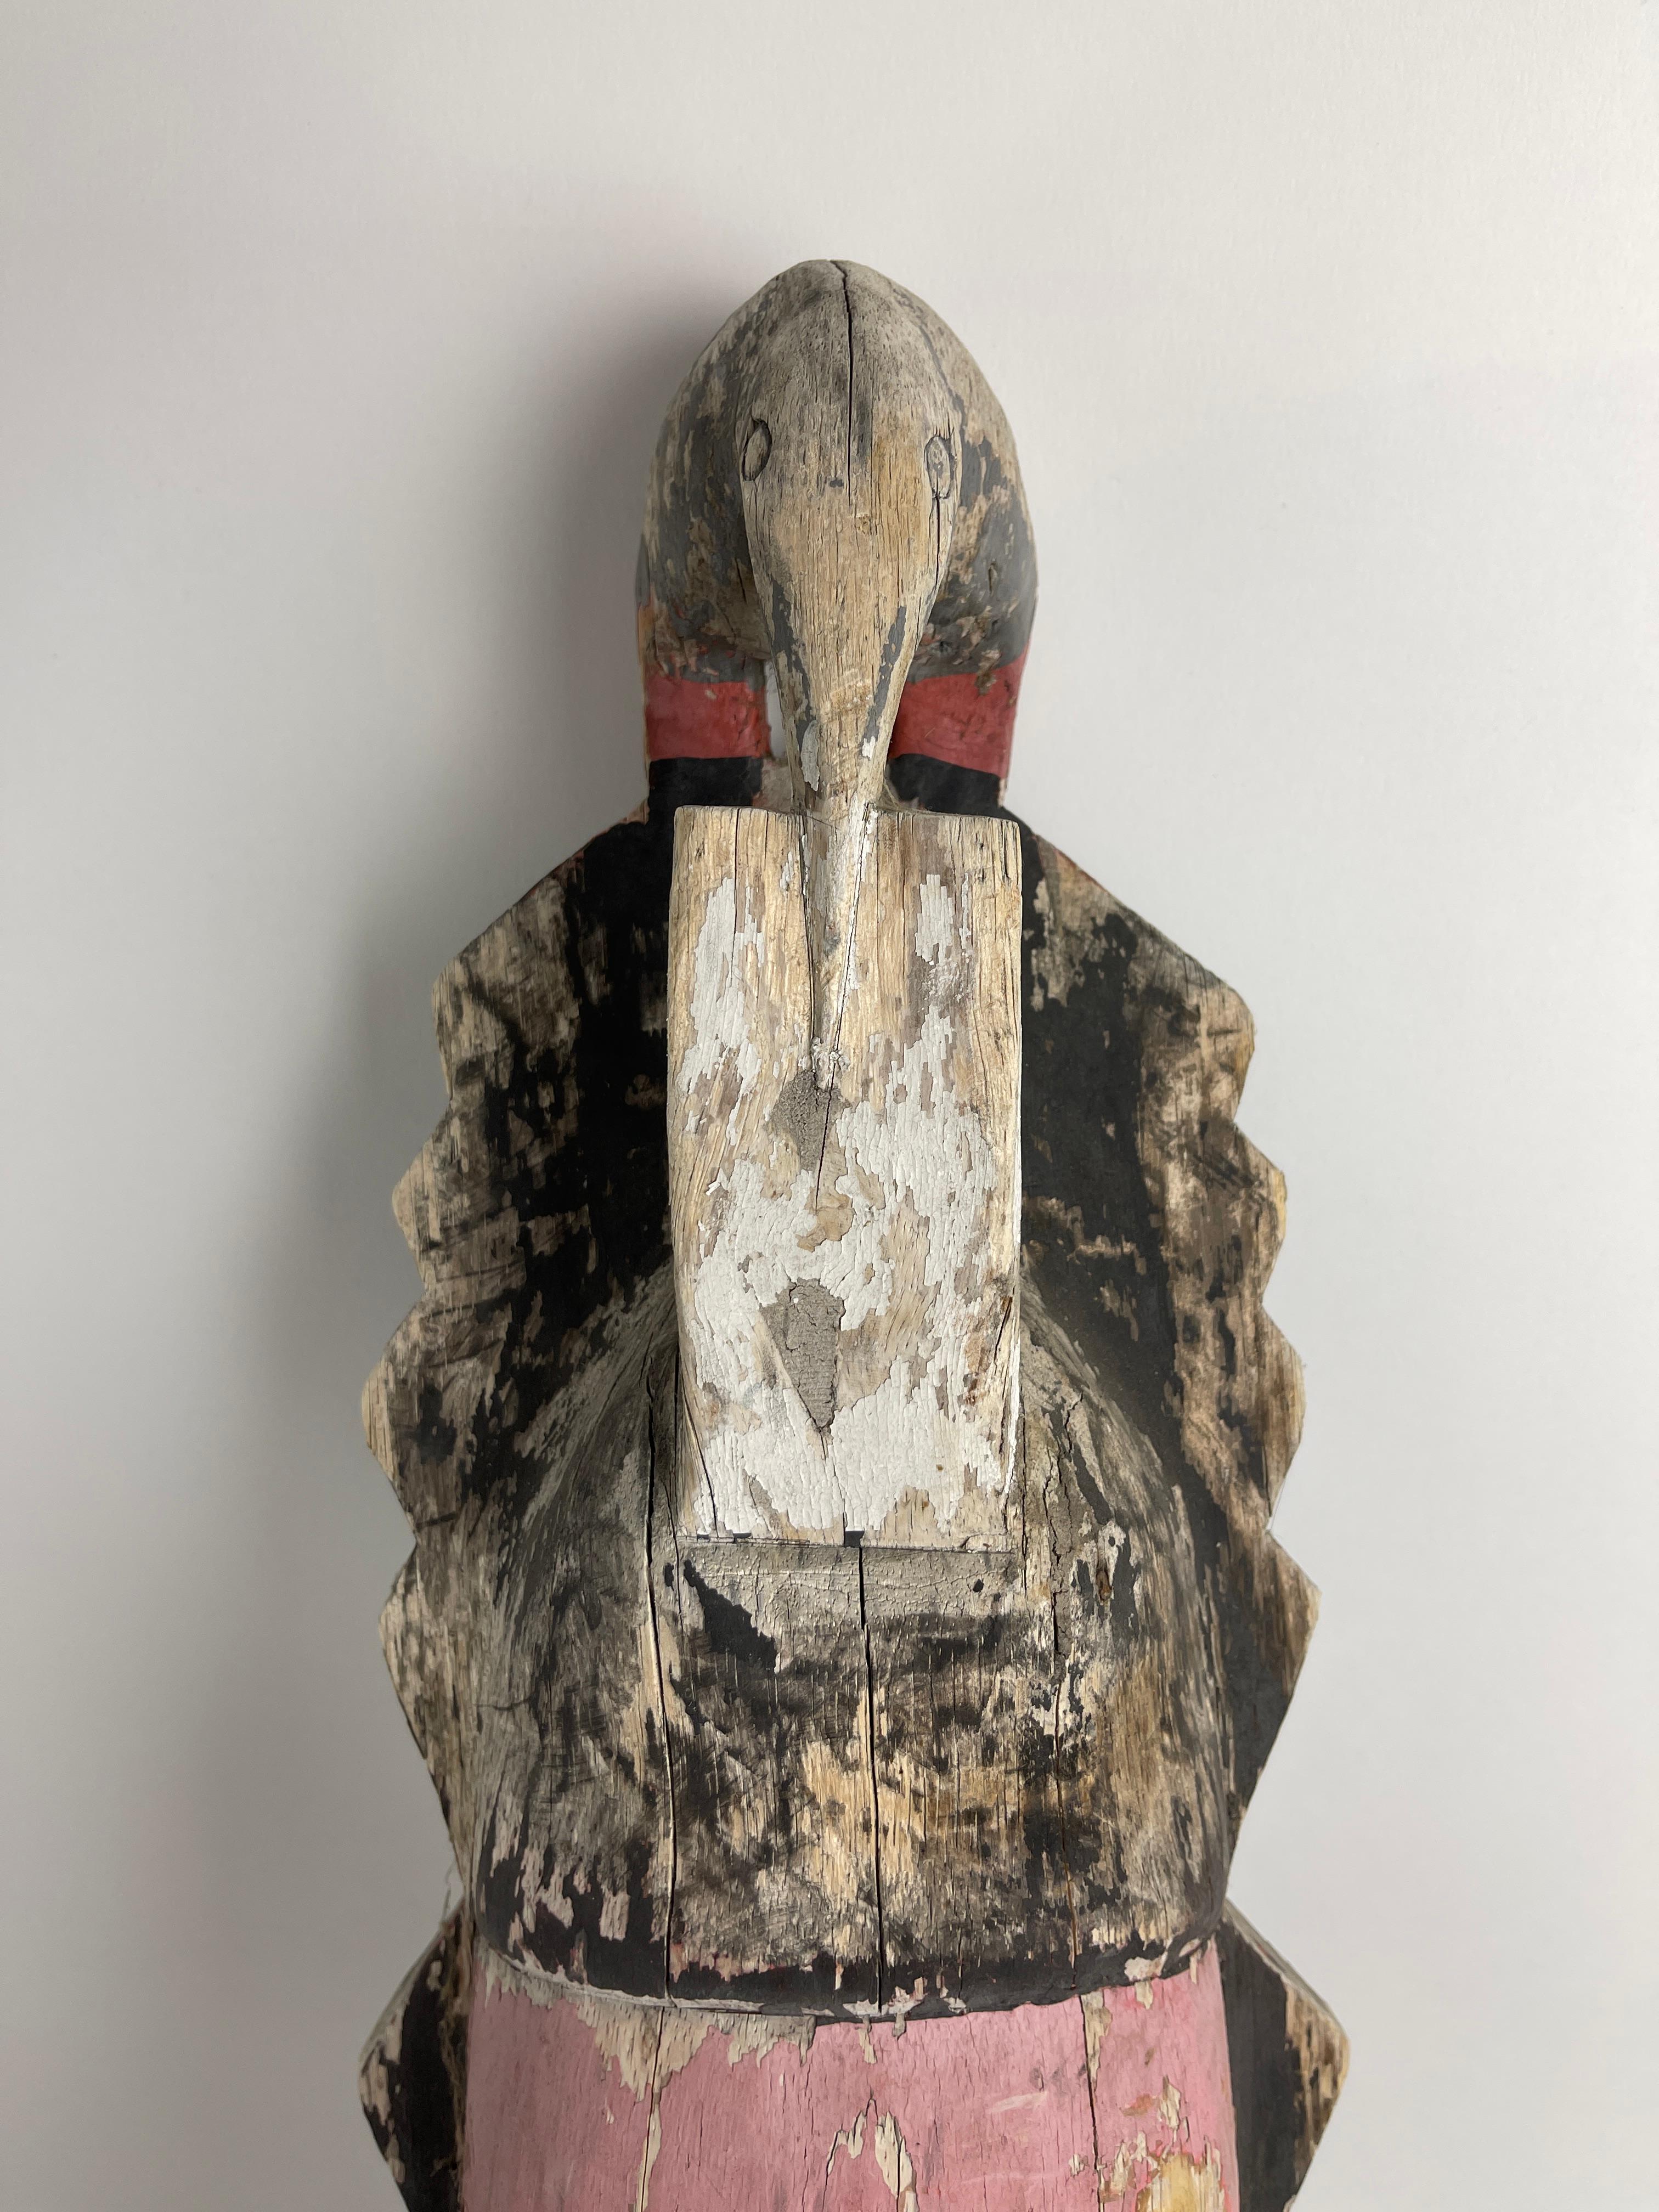 Large Wooden African Mask